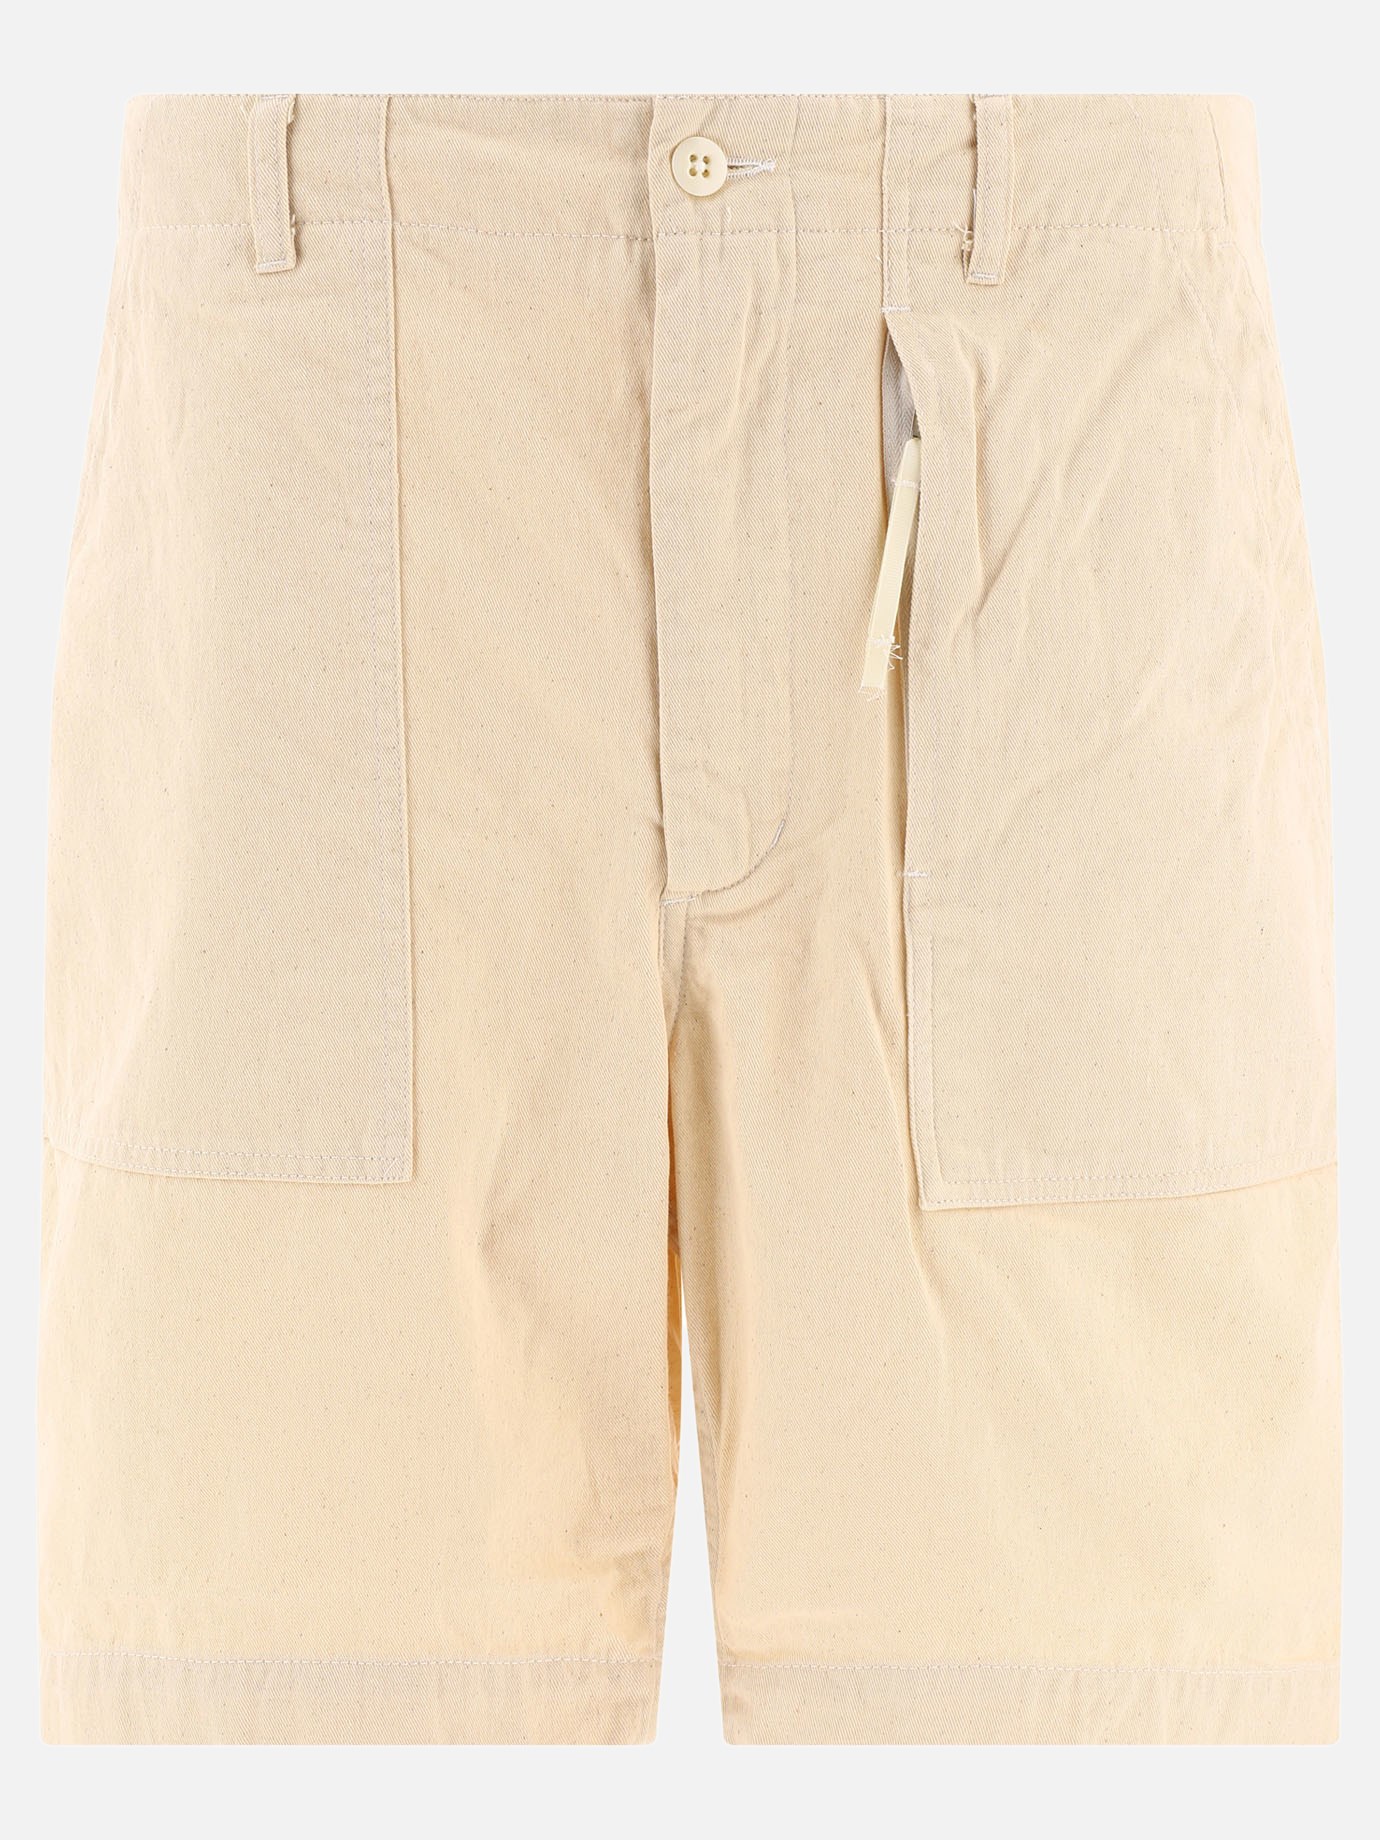 Short  Fatigue by Engineered Garments - 1